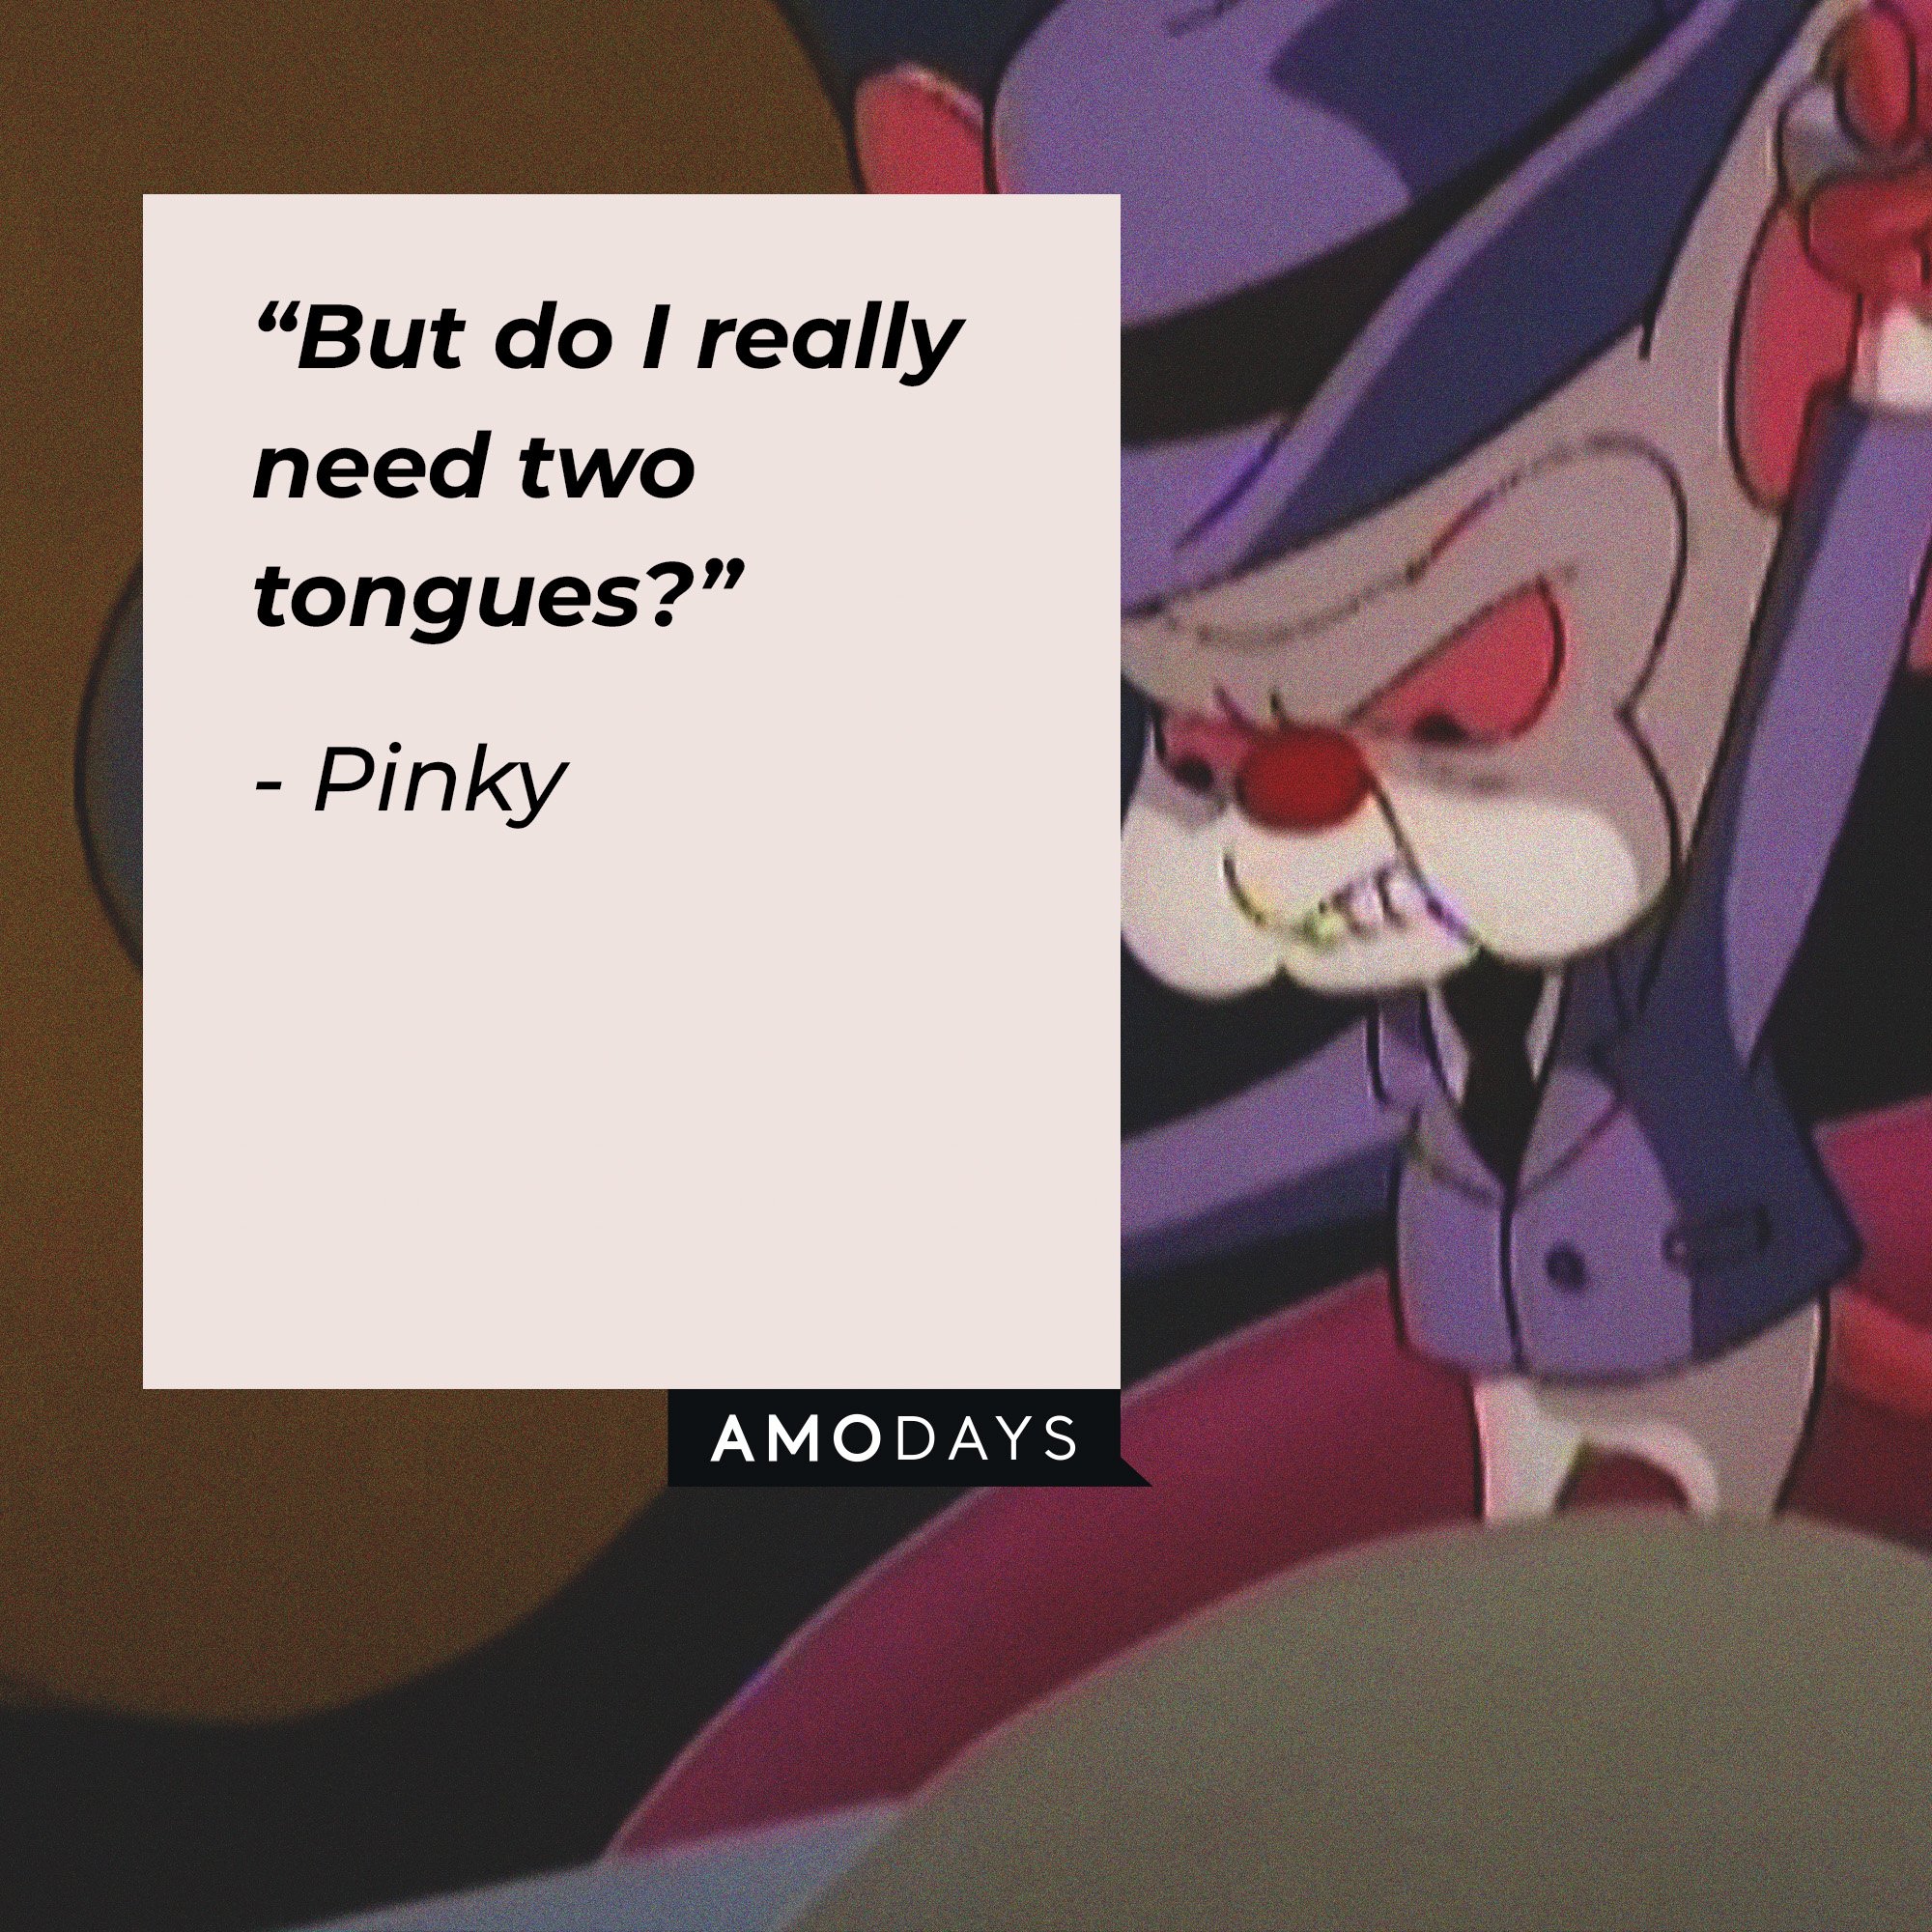 Pinky's quote: “But do I really need two tongues?” | Image: AmoDays